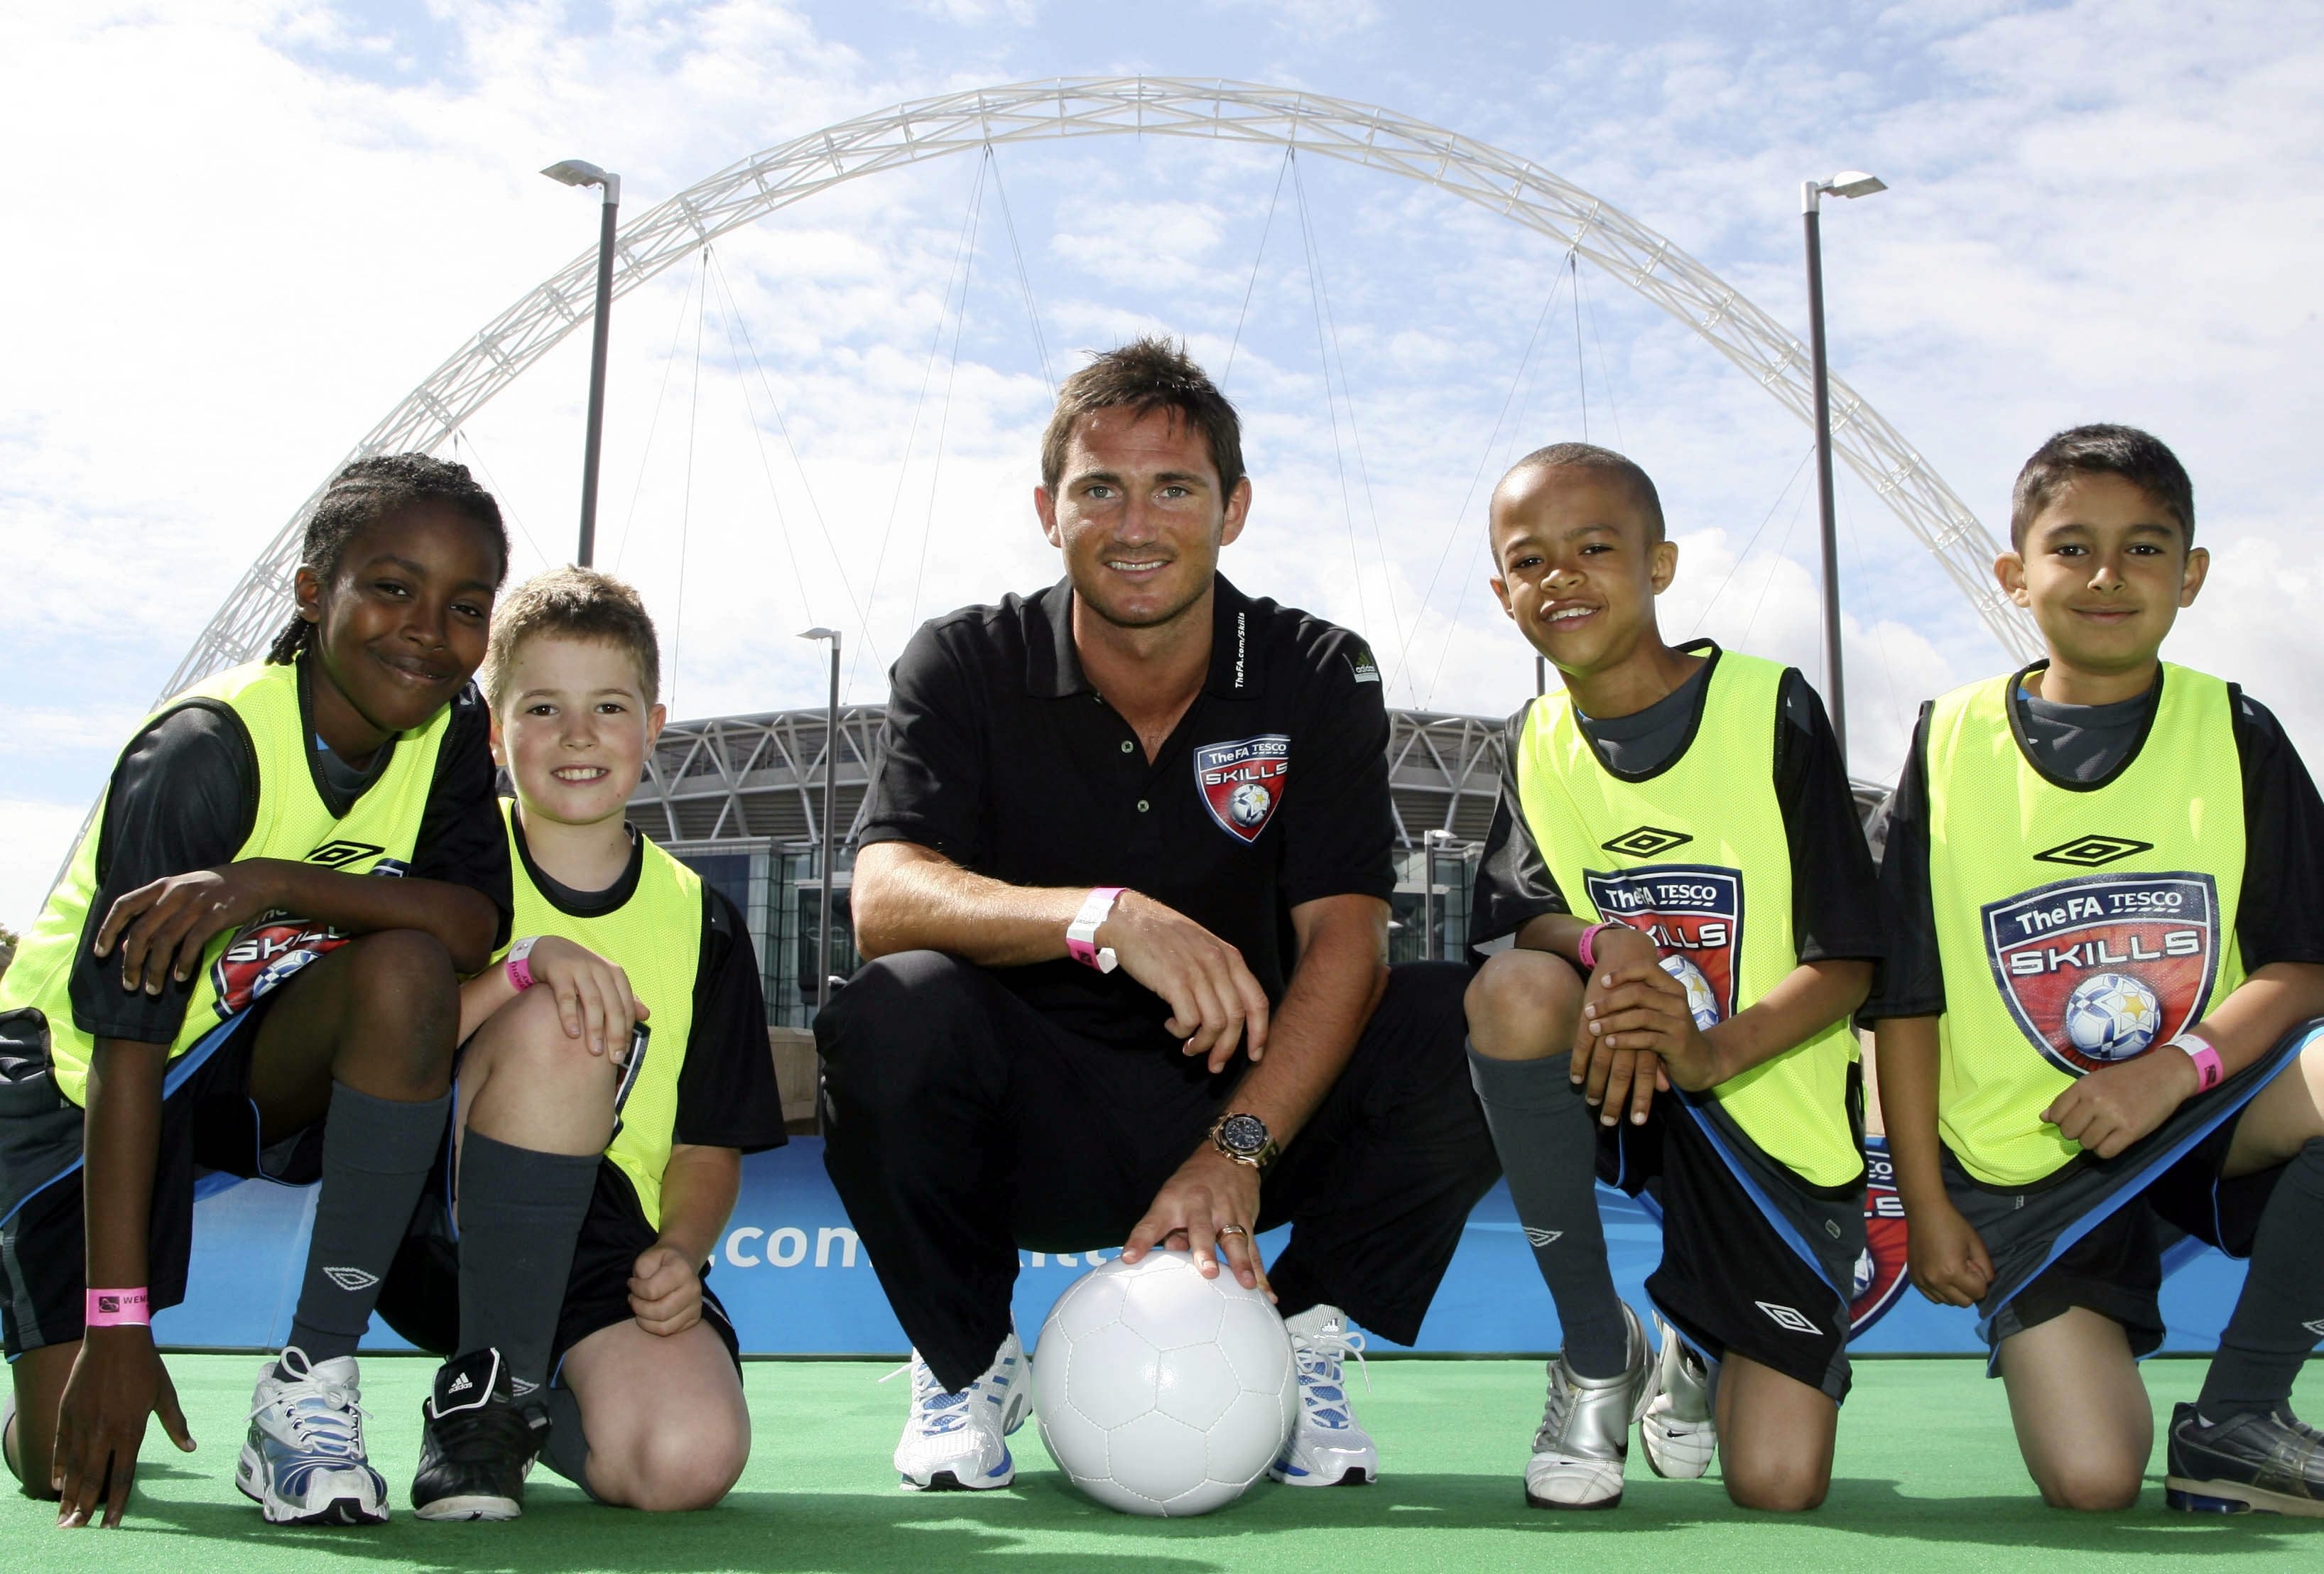 Free FA Tesco skills training during halfterm Parenting